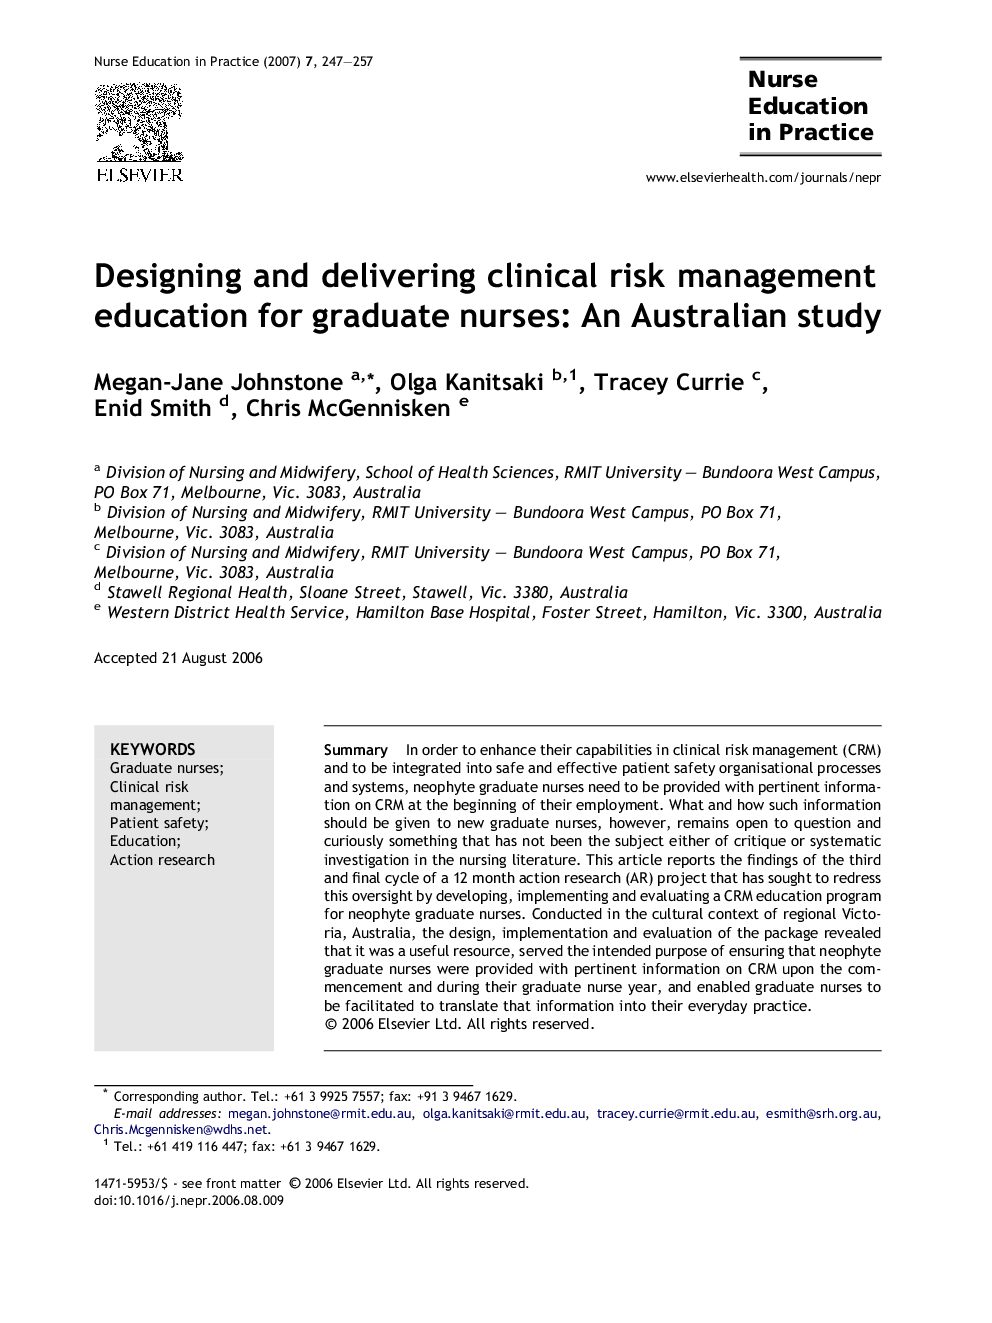 Designing and delivering clinical risk management education for graduate nurses: An Australian study